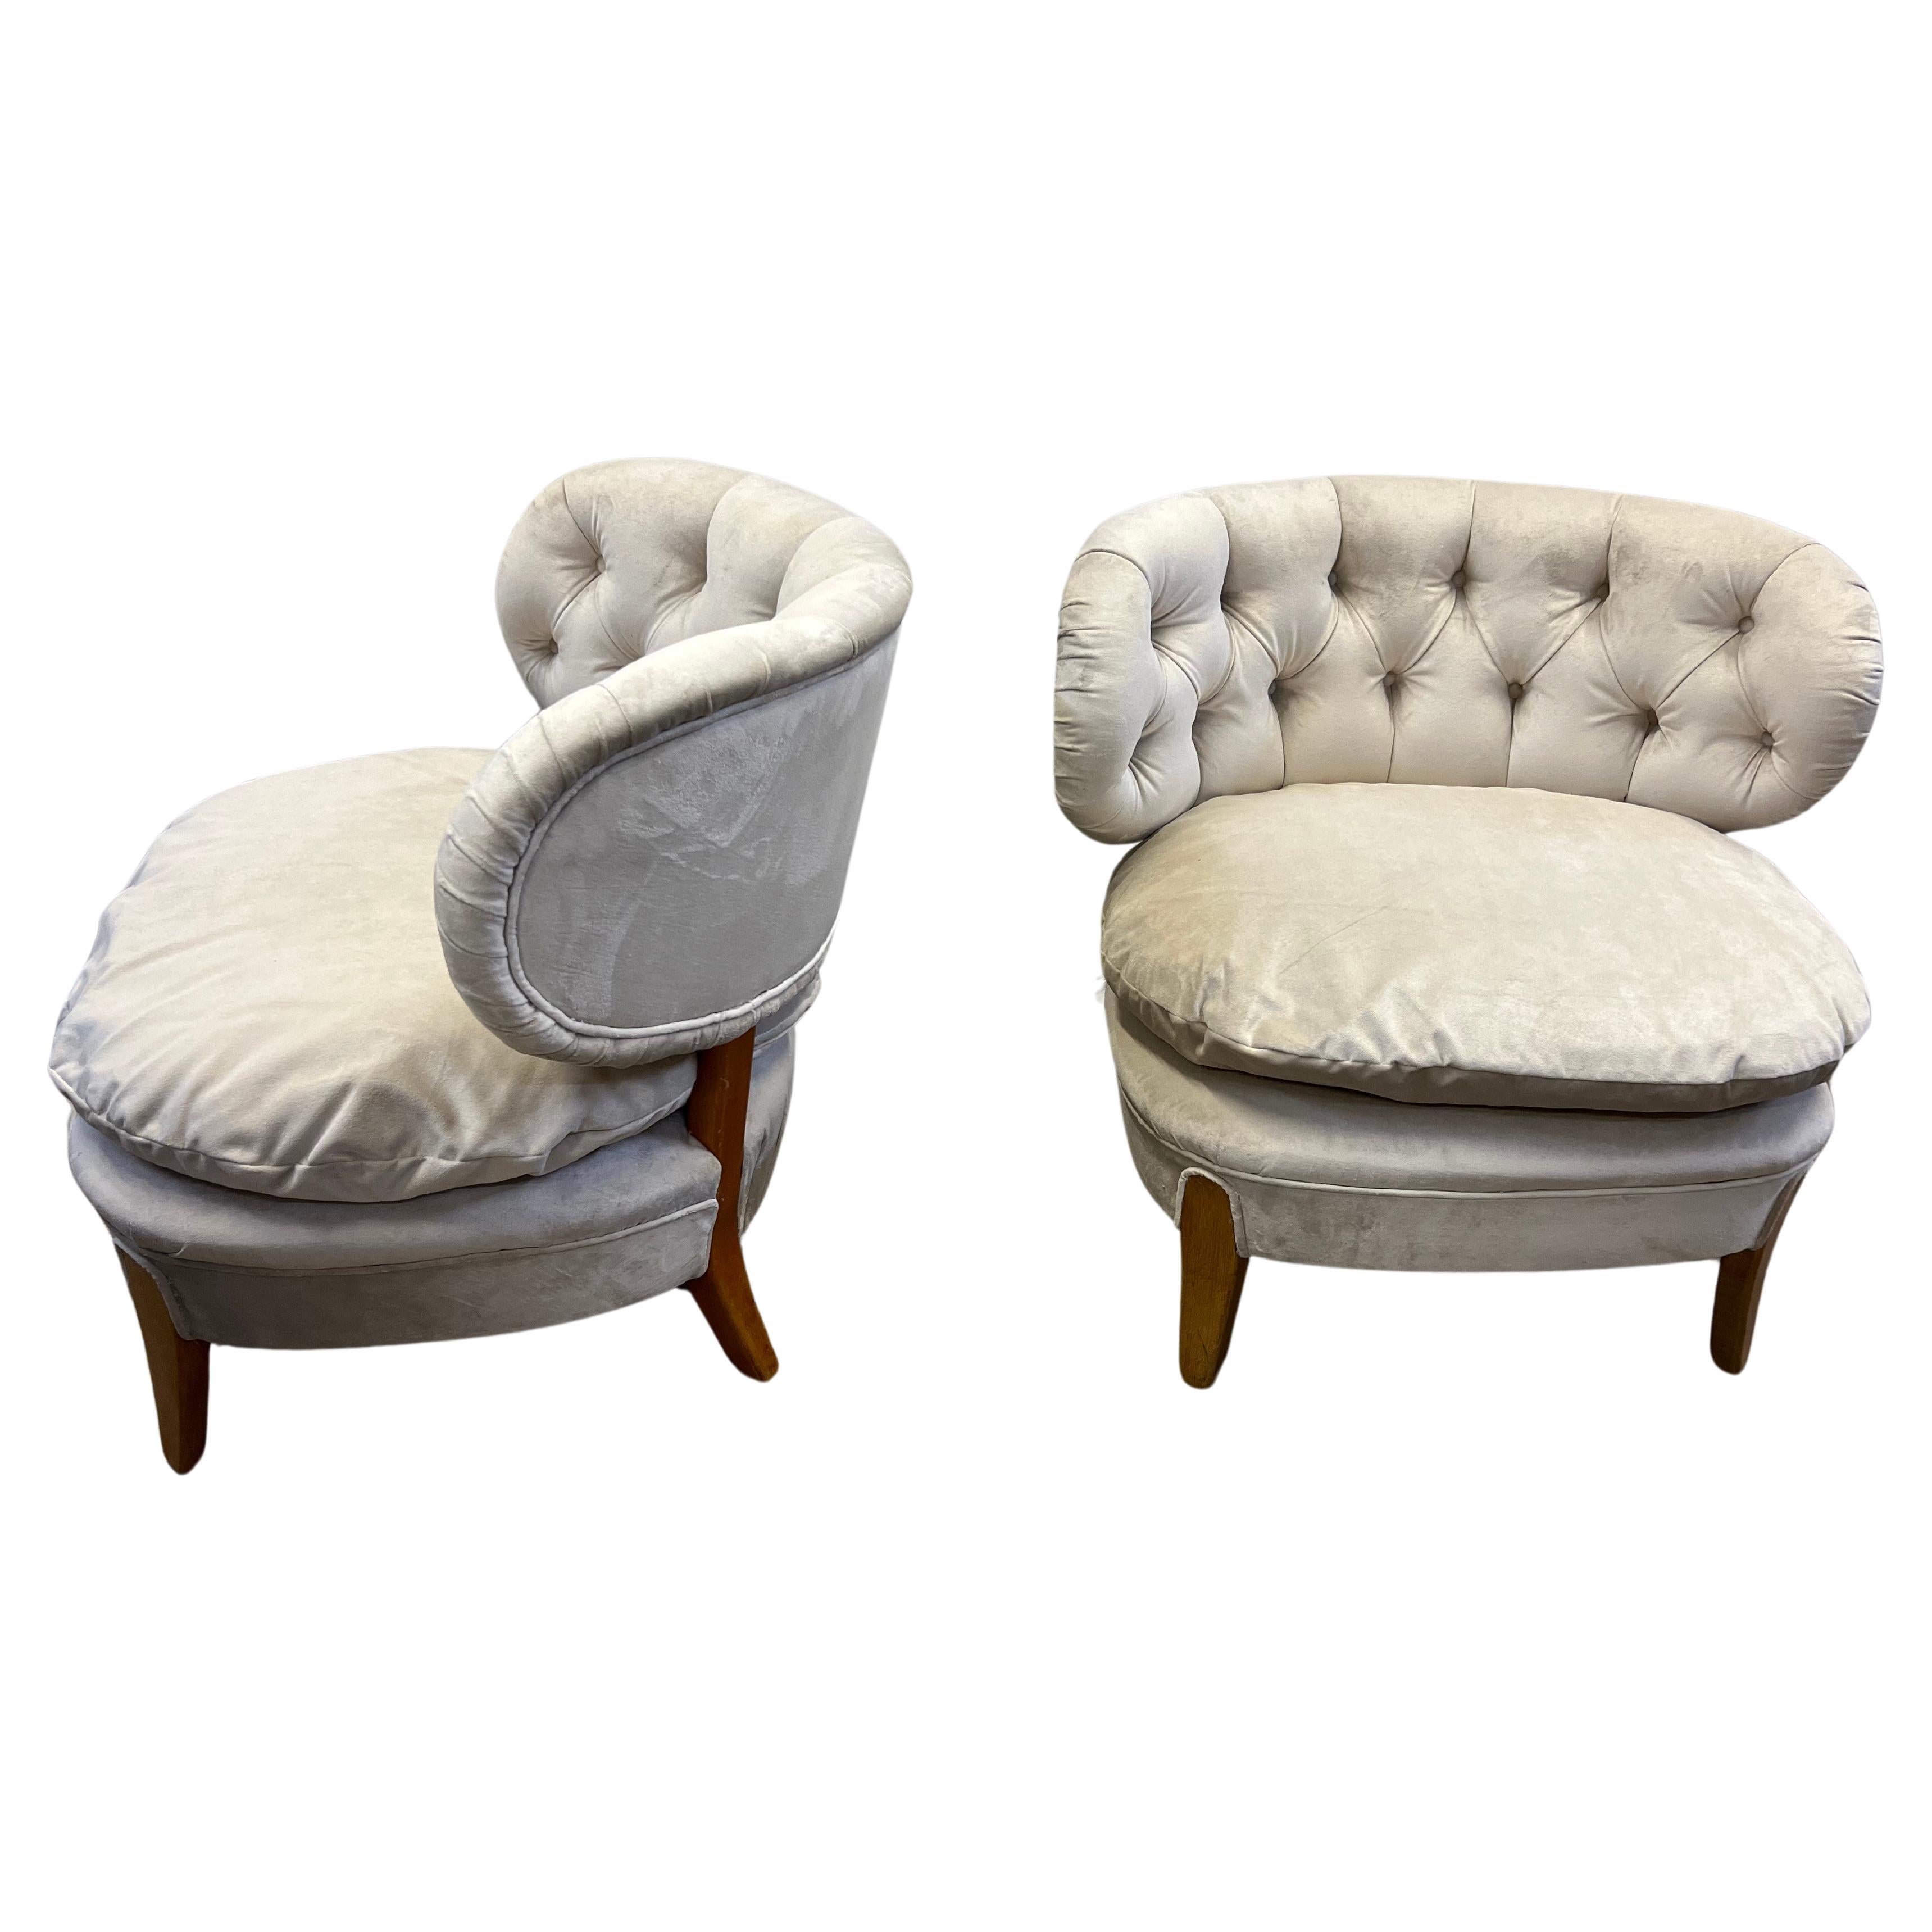 What a beautiful and special pair of original Otto Schultz chairs that have been recently reupholstered featuring a loose cushion in a luxurious taupe colored velvet! These are literally ready to go in any designer space from traditional to